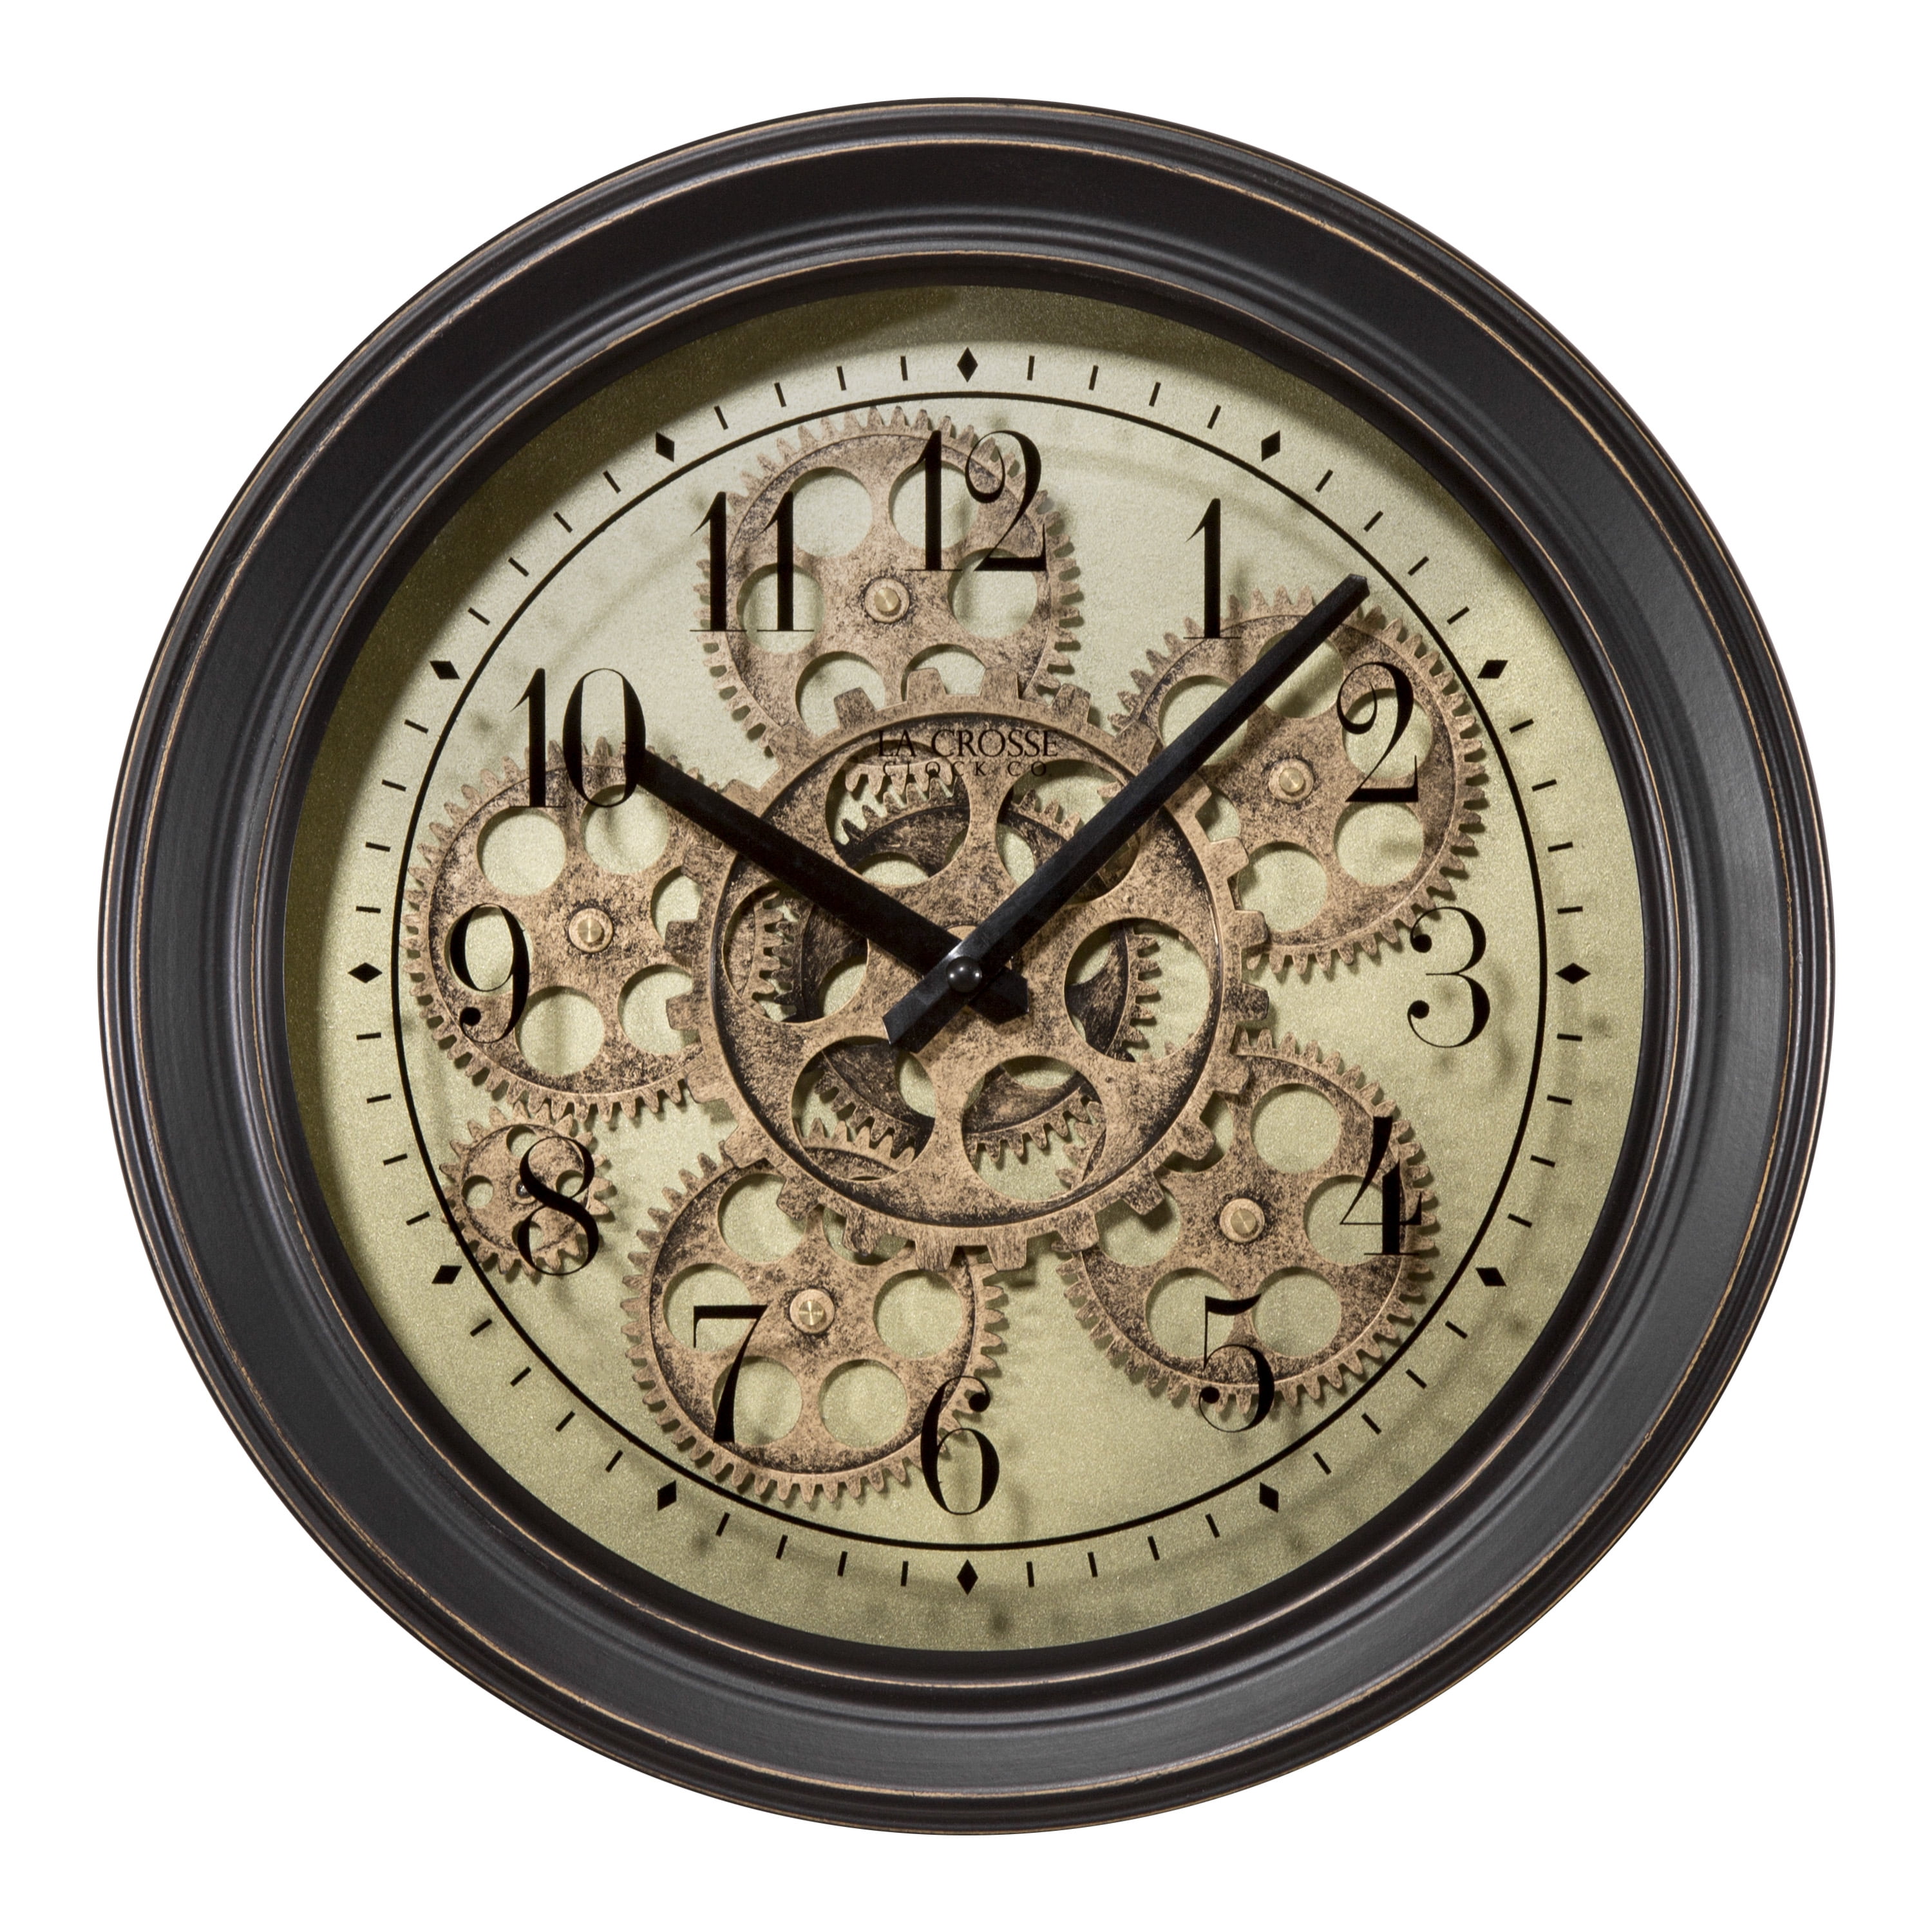 Details about   Better Homes and Gardens 20" Rustic Metal Moving Gear Wall Clock Arabic Numbers 